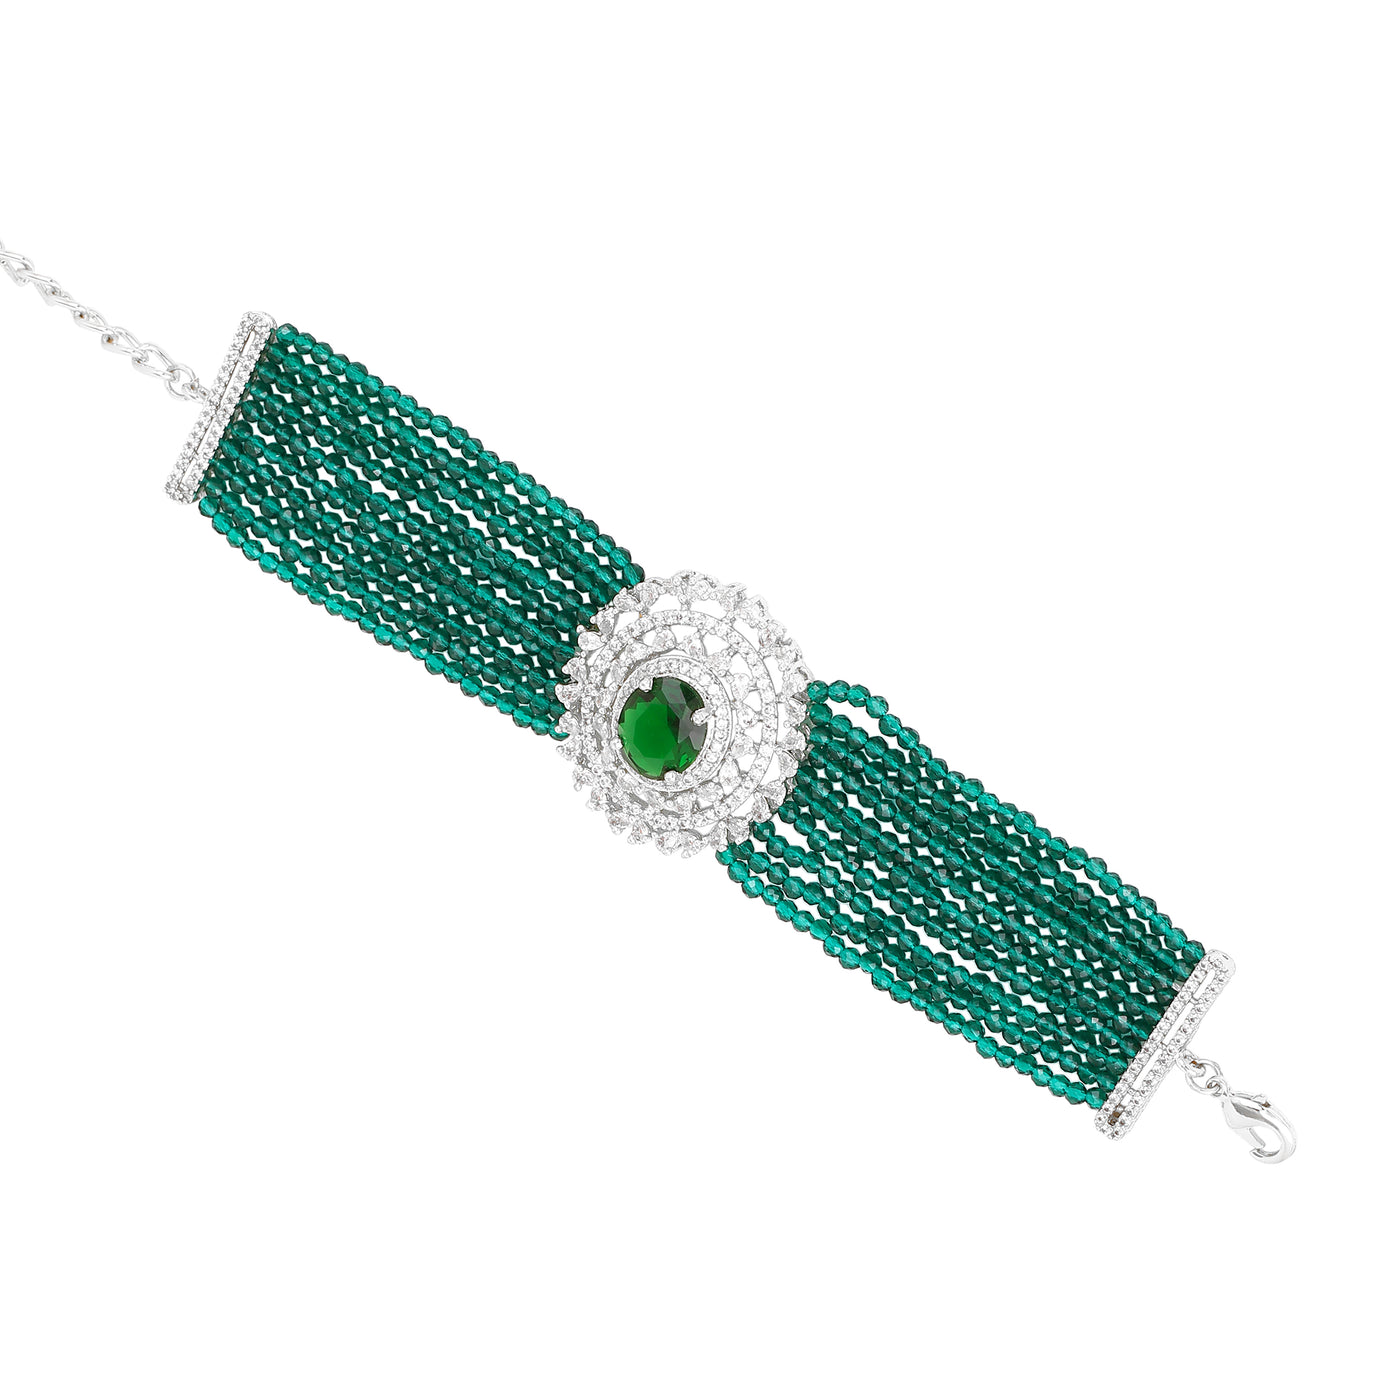 Estele Rhodium Plated CZ Sparkling Multi-Layered Bracelet with Emerald Beads for Women